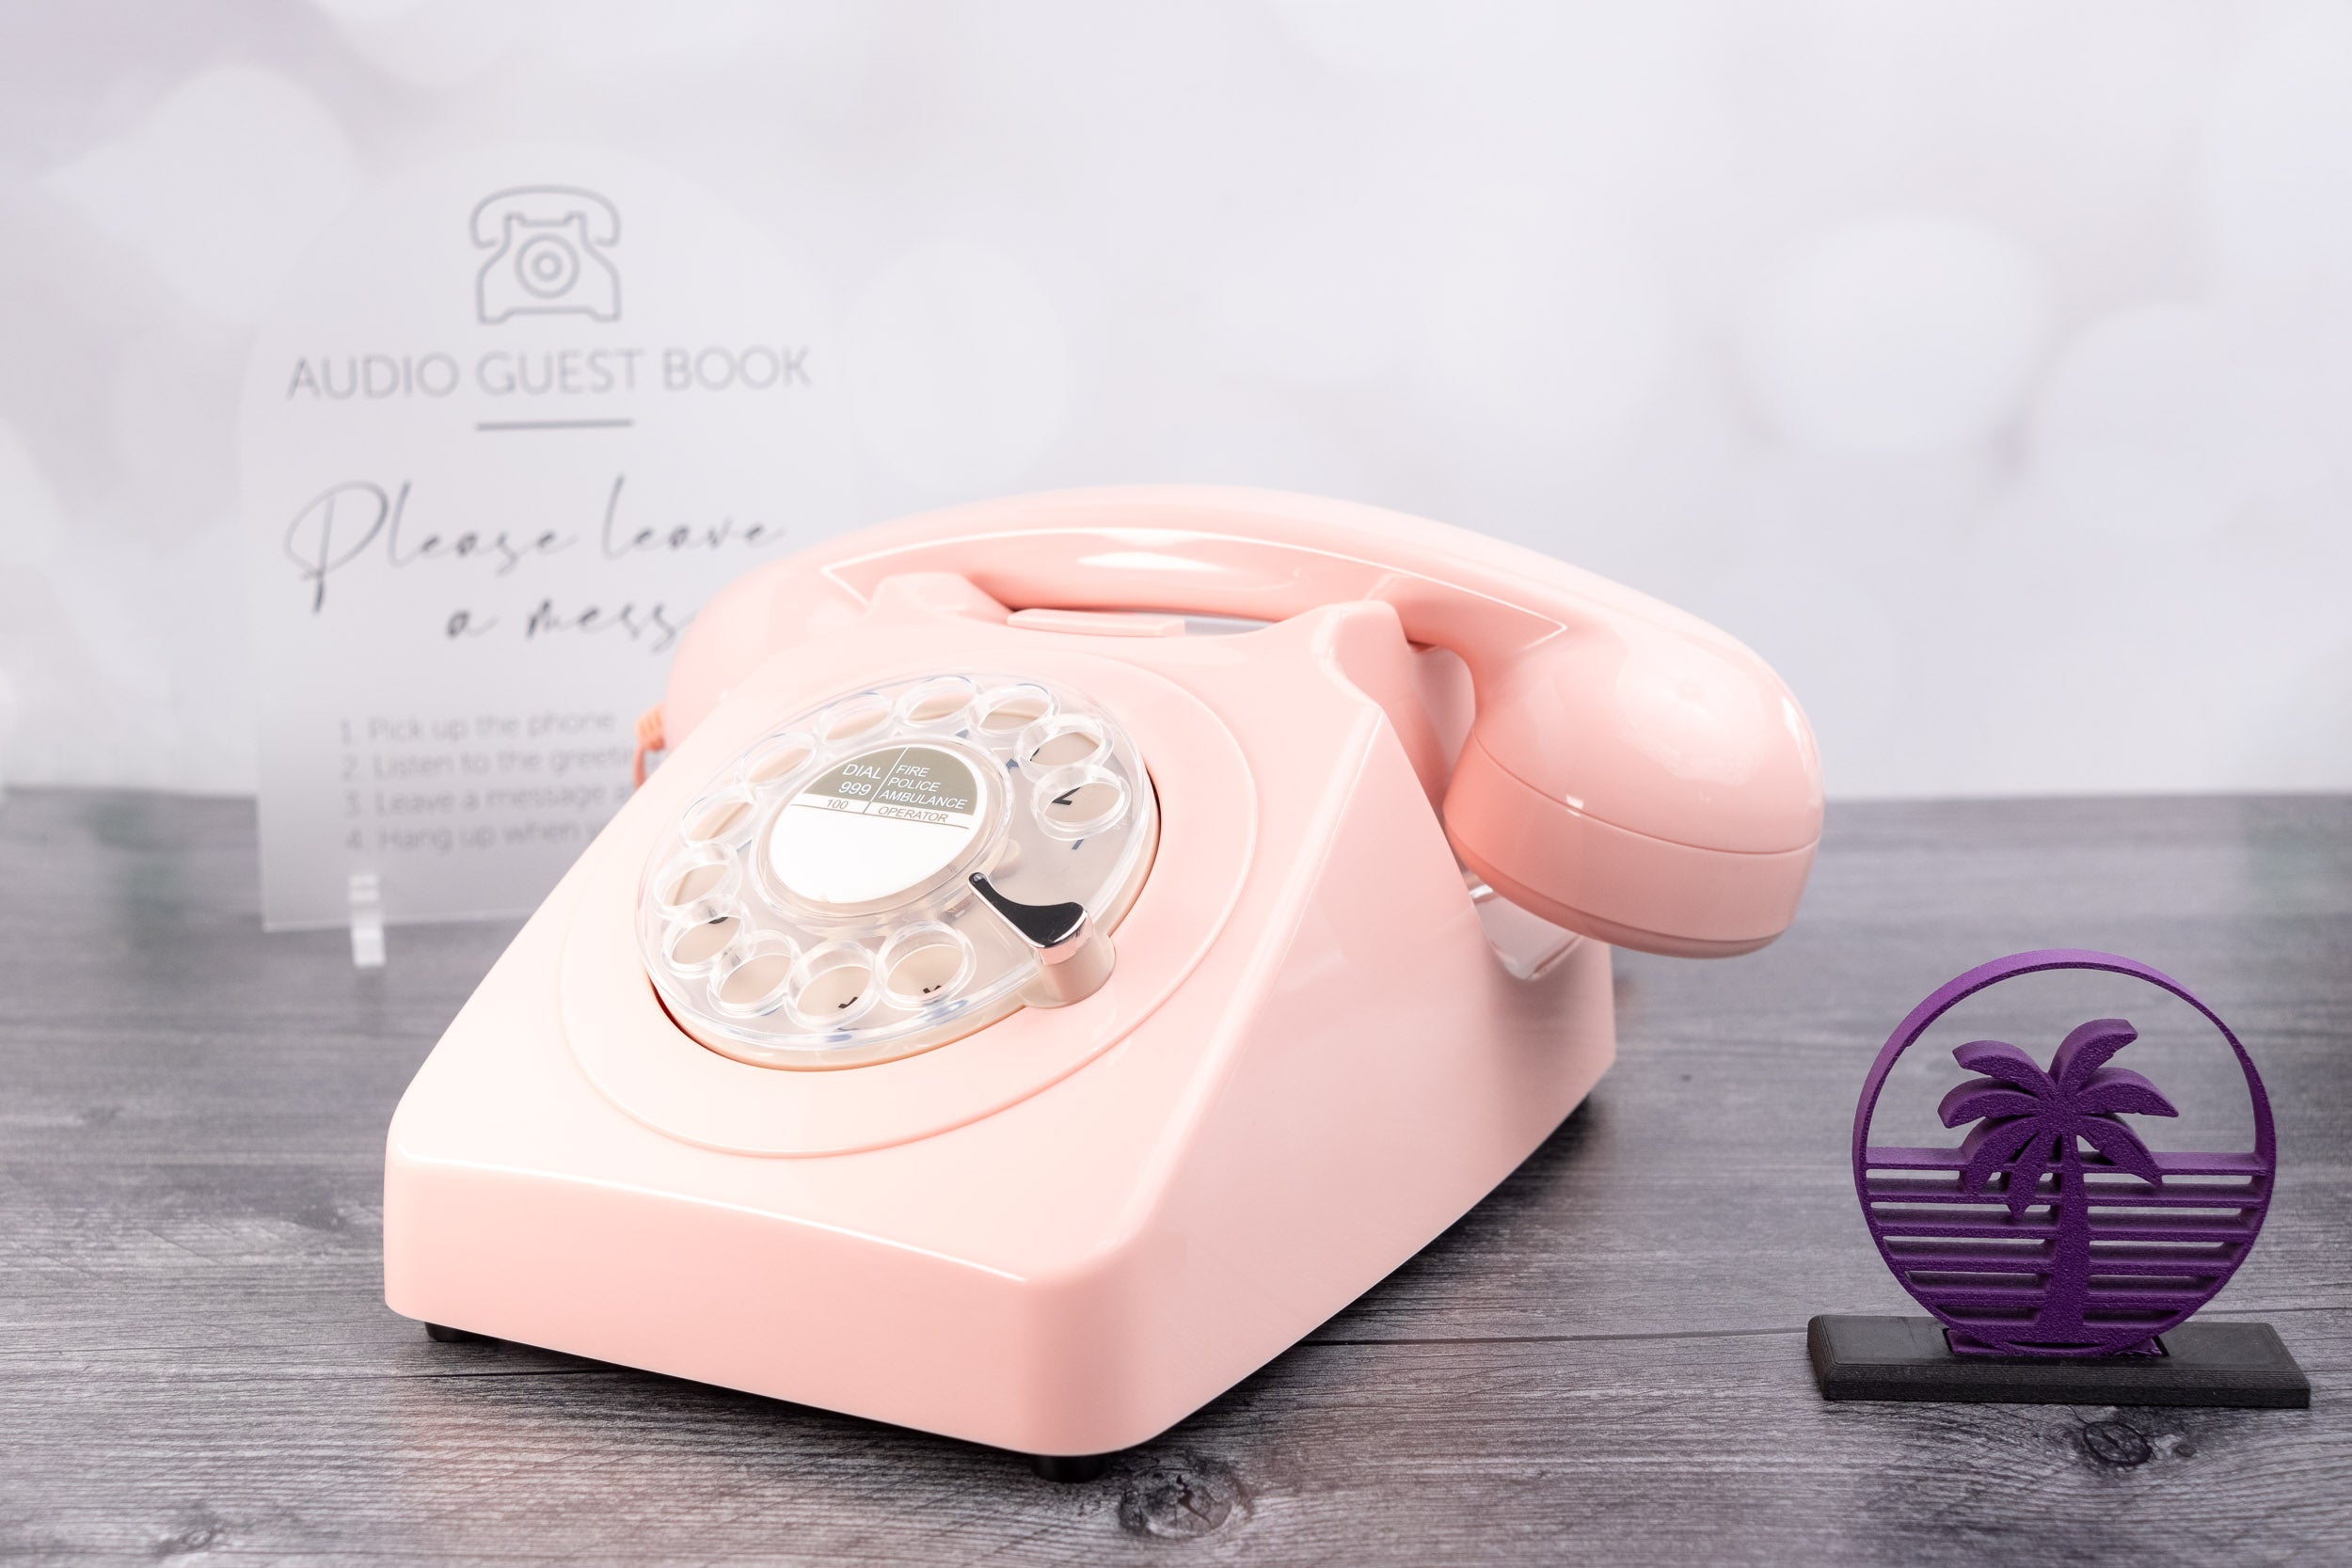 The "746" Retro Rotary Audio Guest Book - Pink